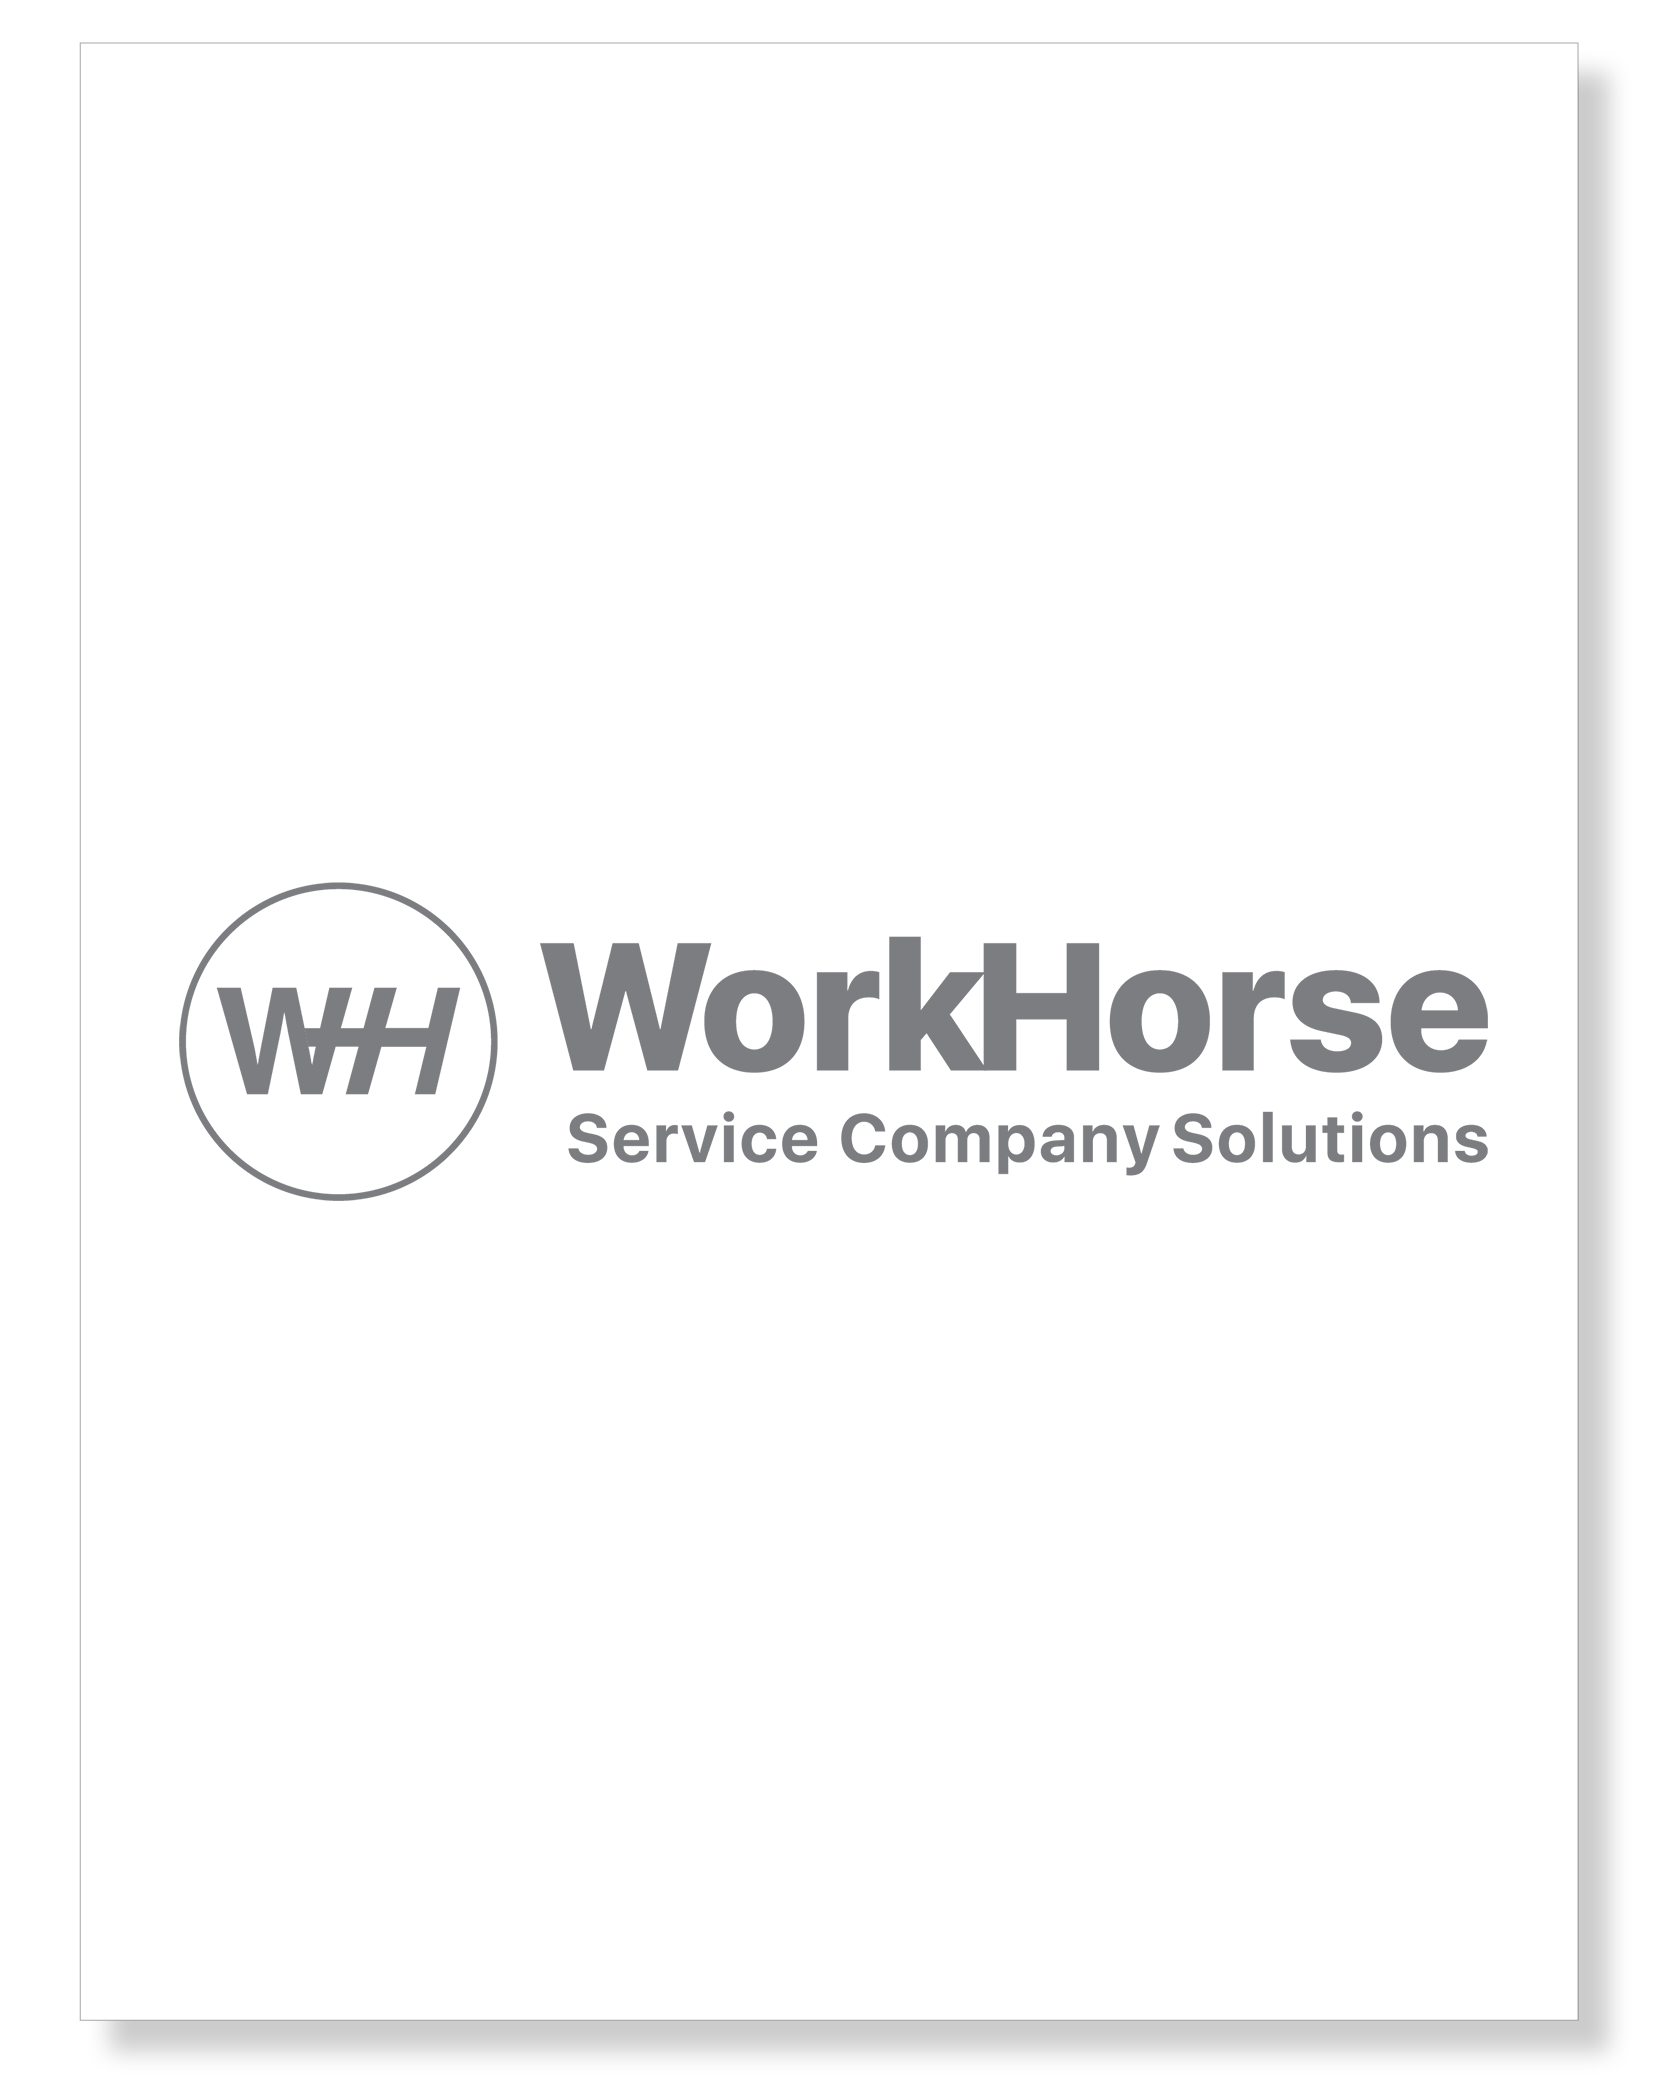 WorkHorse Service Company Solutions